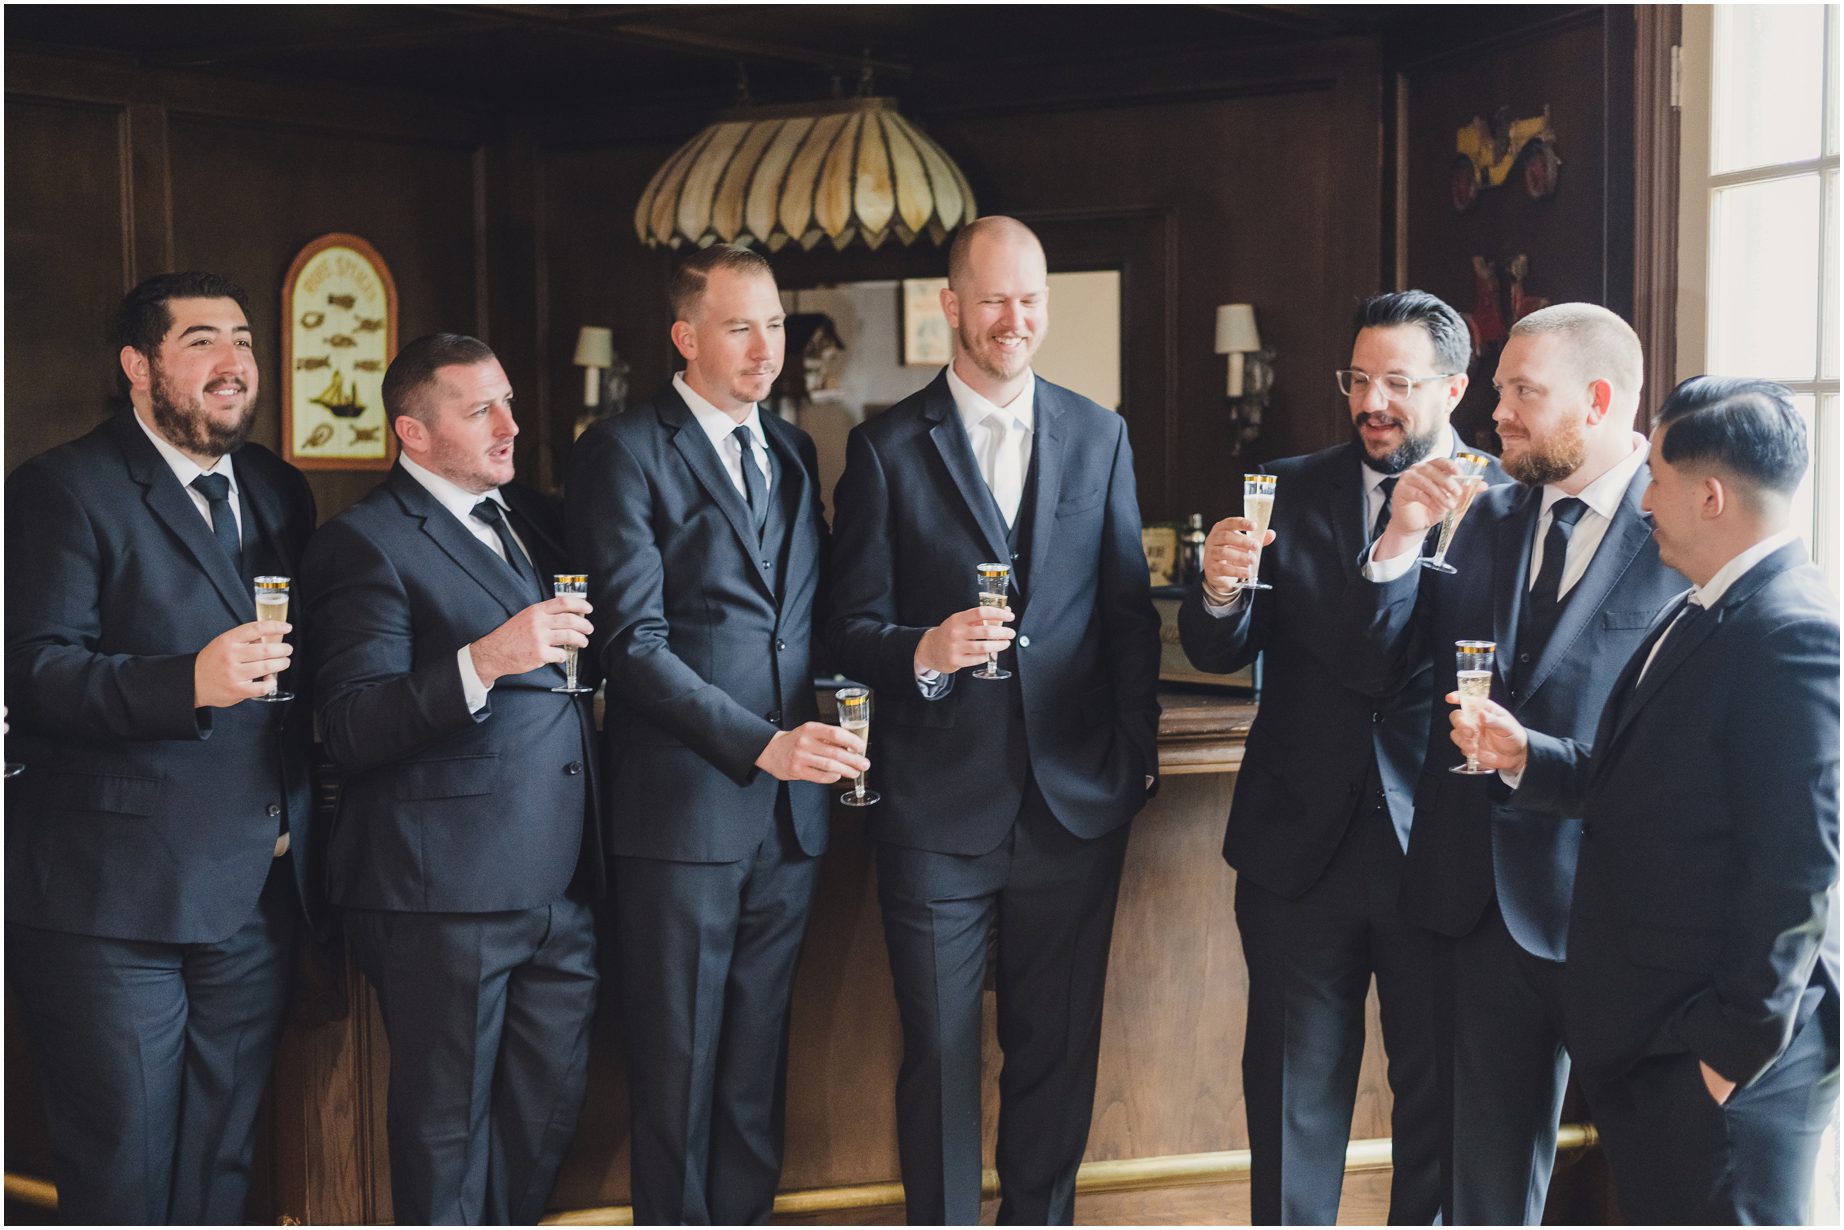 Groom and groomsmen spend a moment together before the wedding